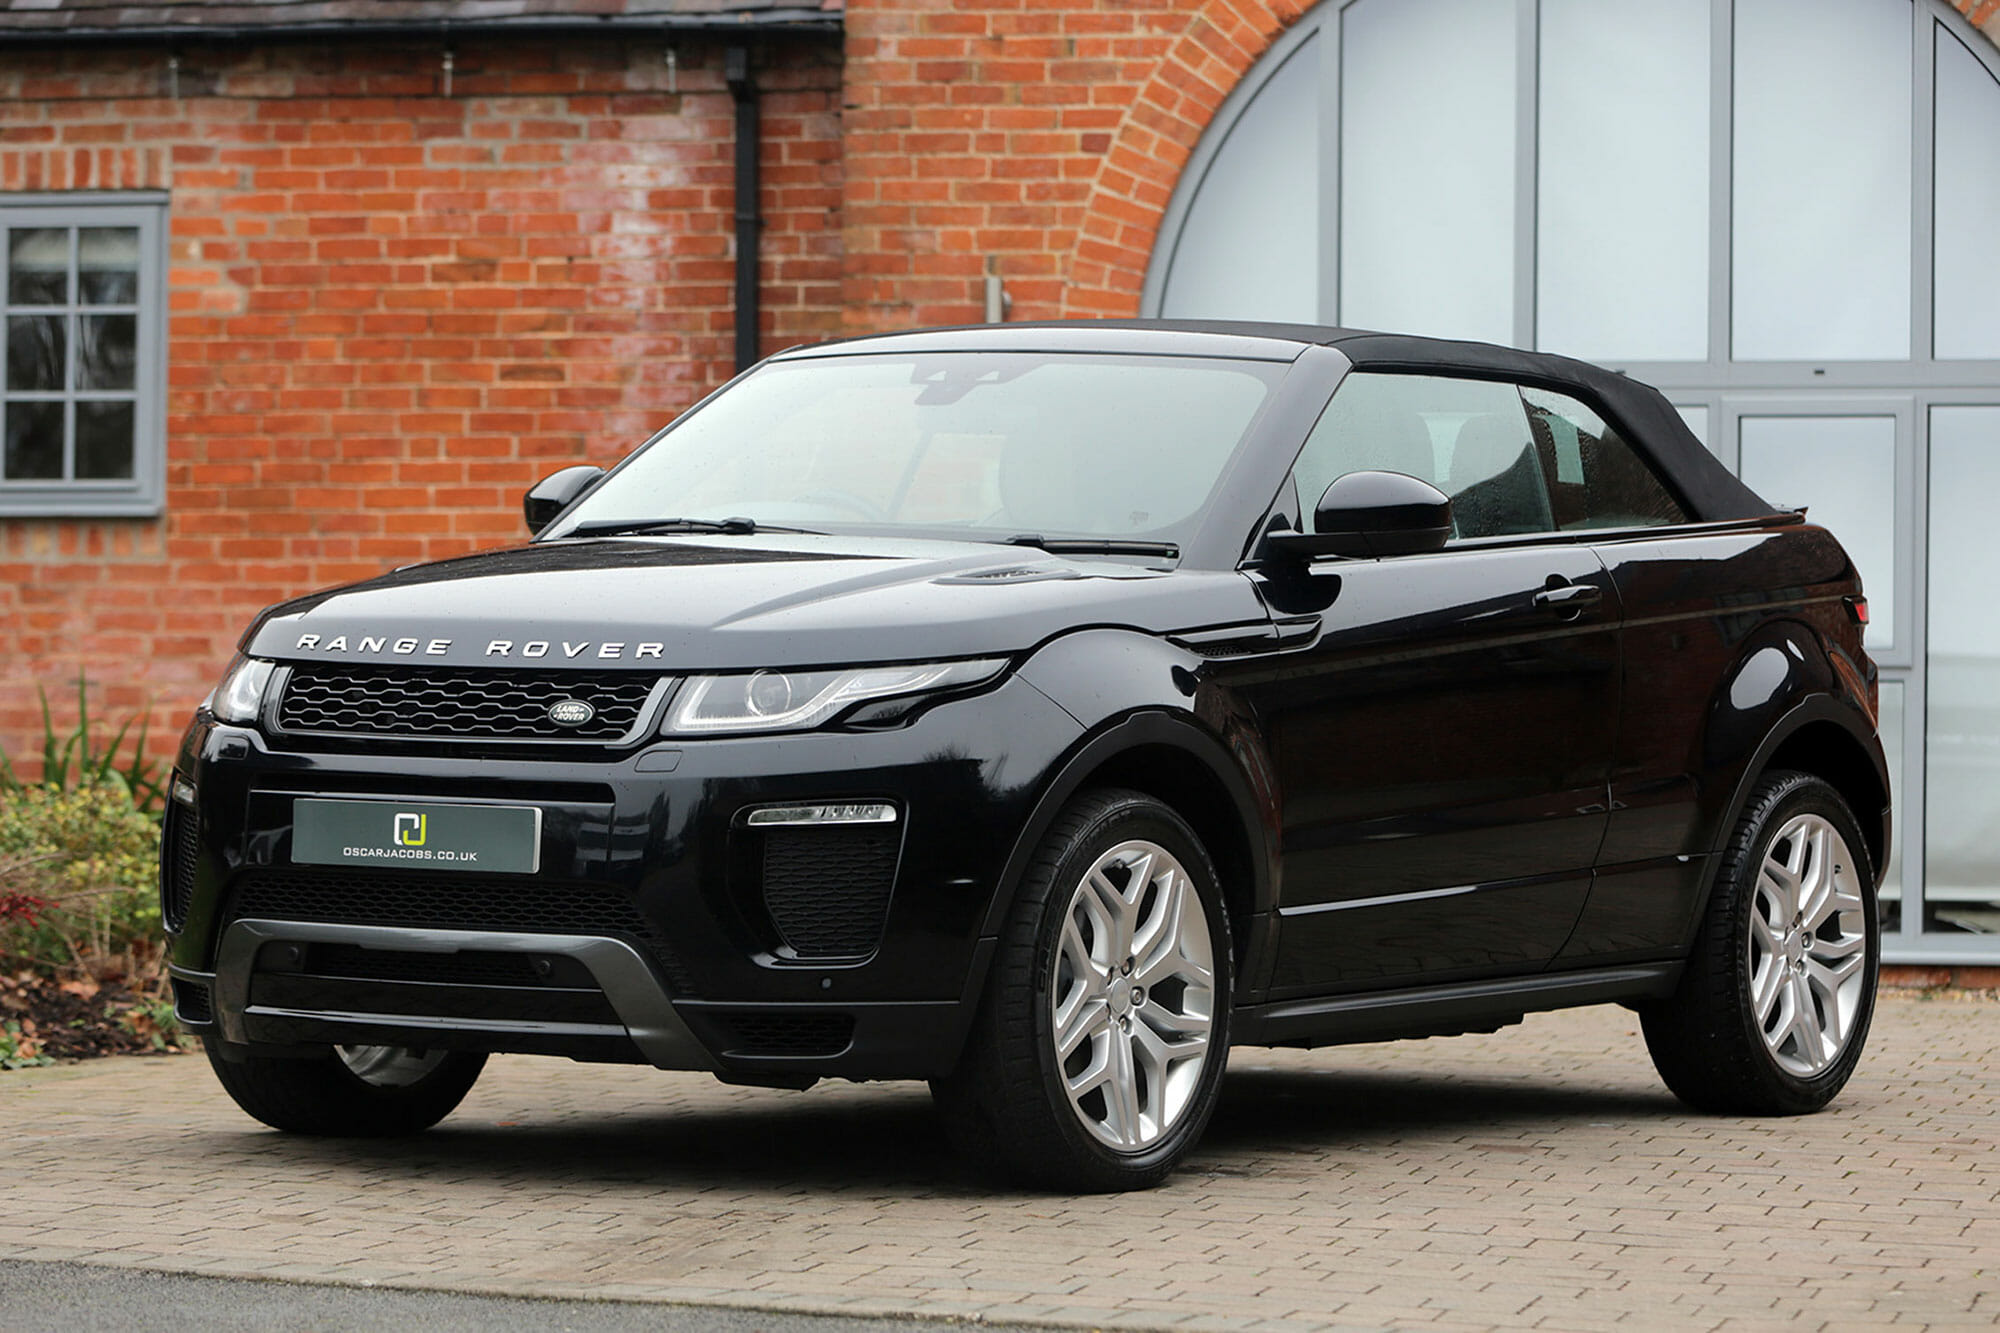 Range Rover Evoque HSE Dynamic Convertible Roof up